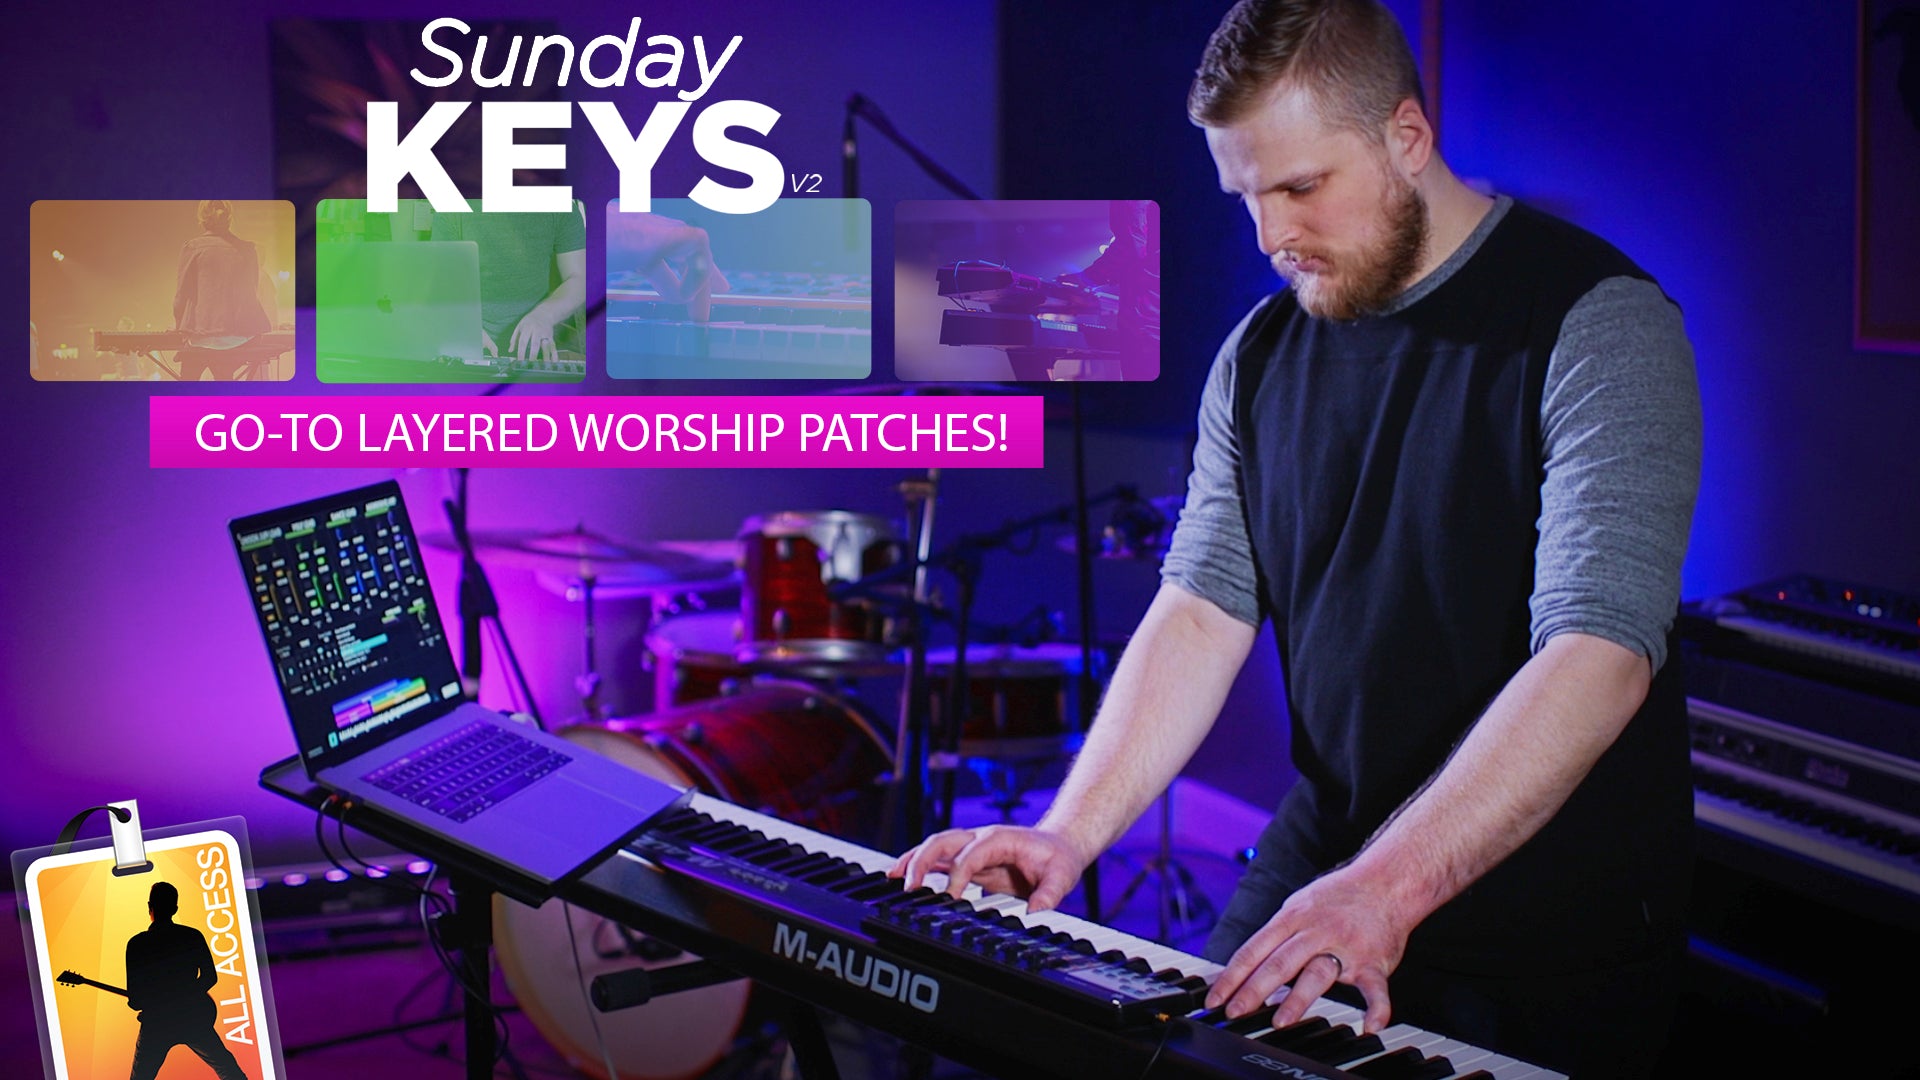 20 Go-To Layered Worship Patches Demo - Sunday Keys Version 2